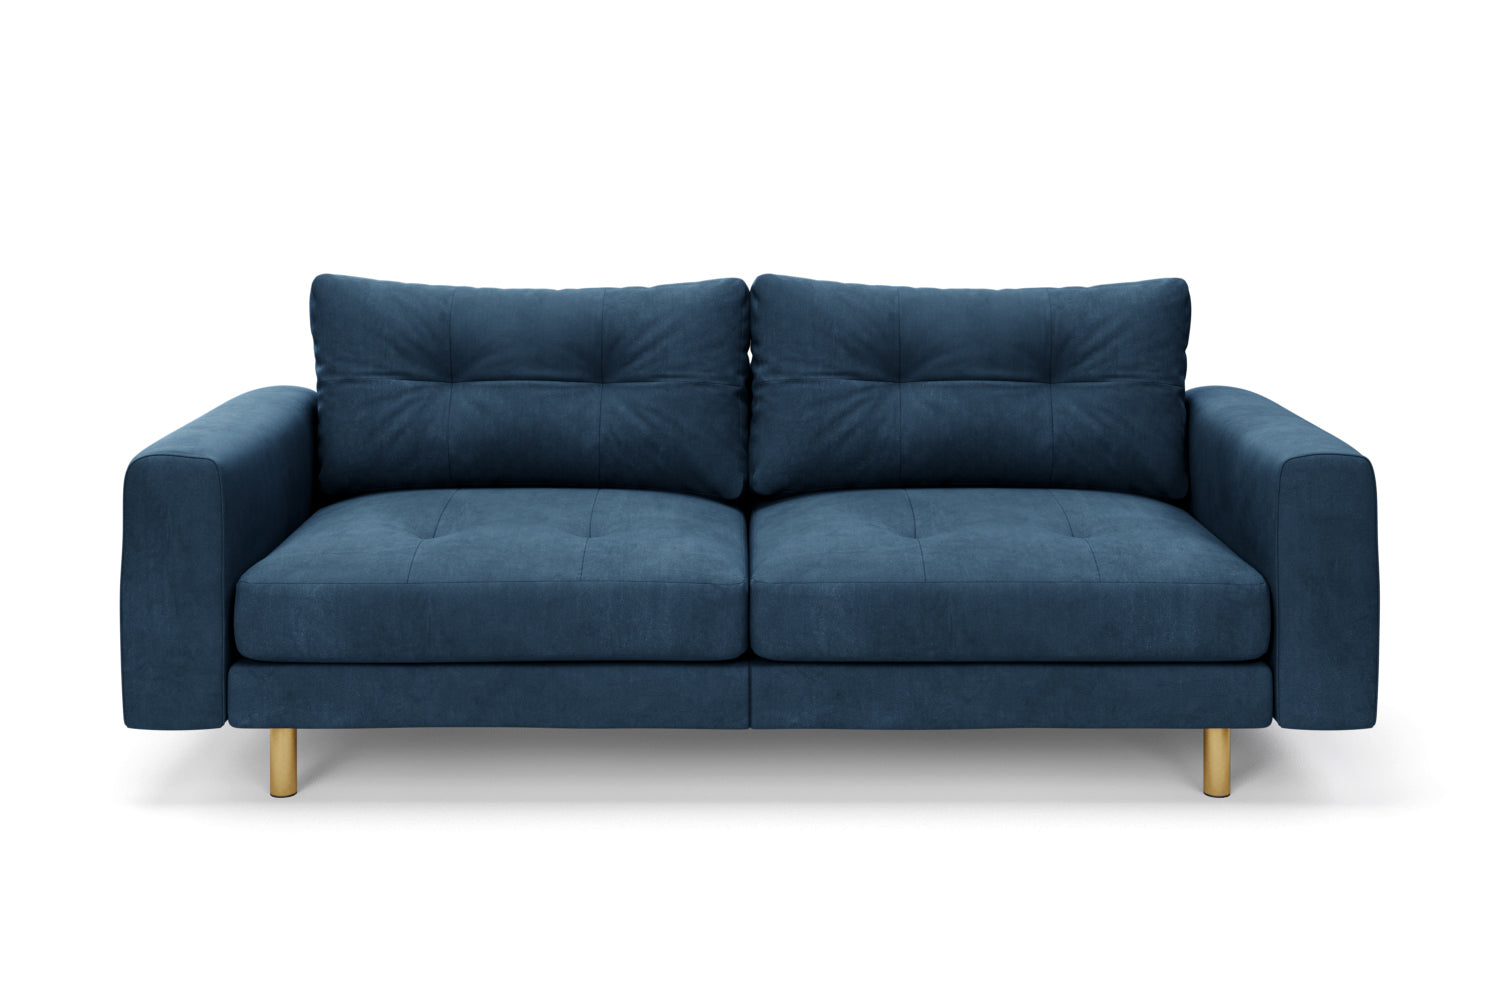 SNUG | The Big Chill 3 Seater Sofa Blind Button Back and Seat Cushions in Blue Steel variant_40613701746736